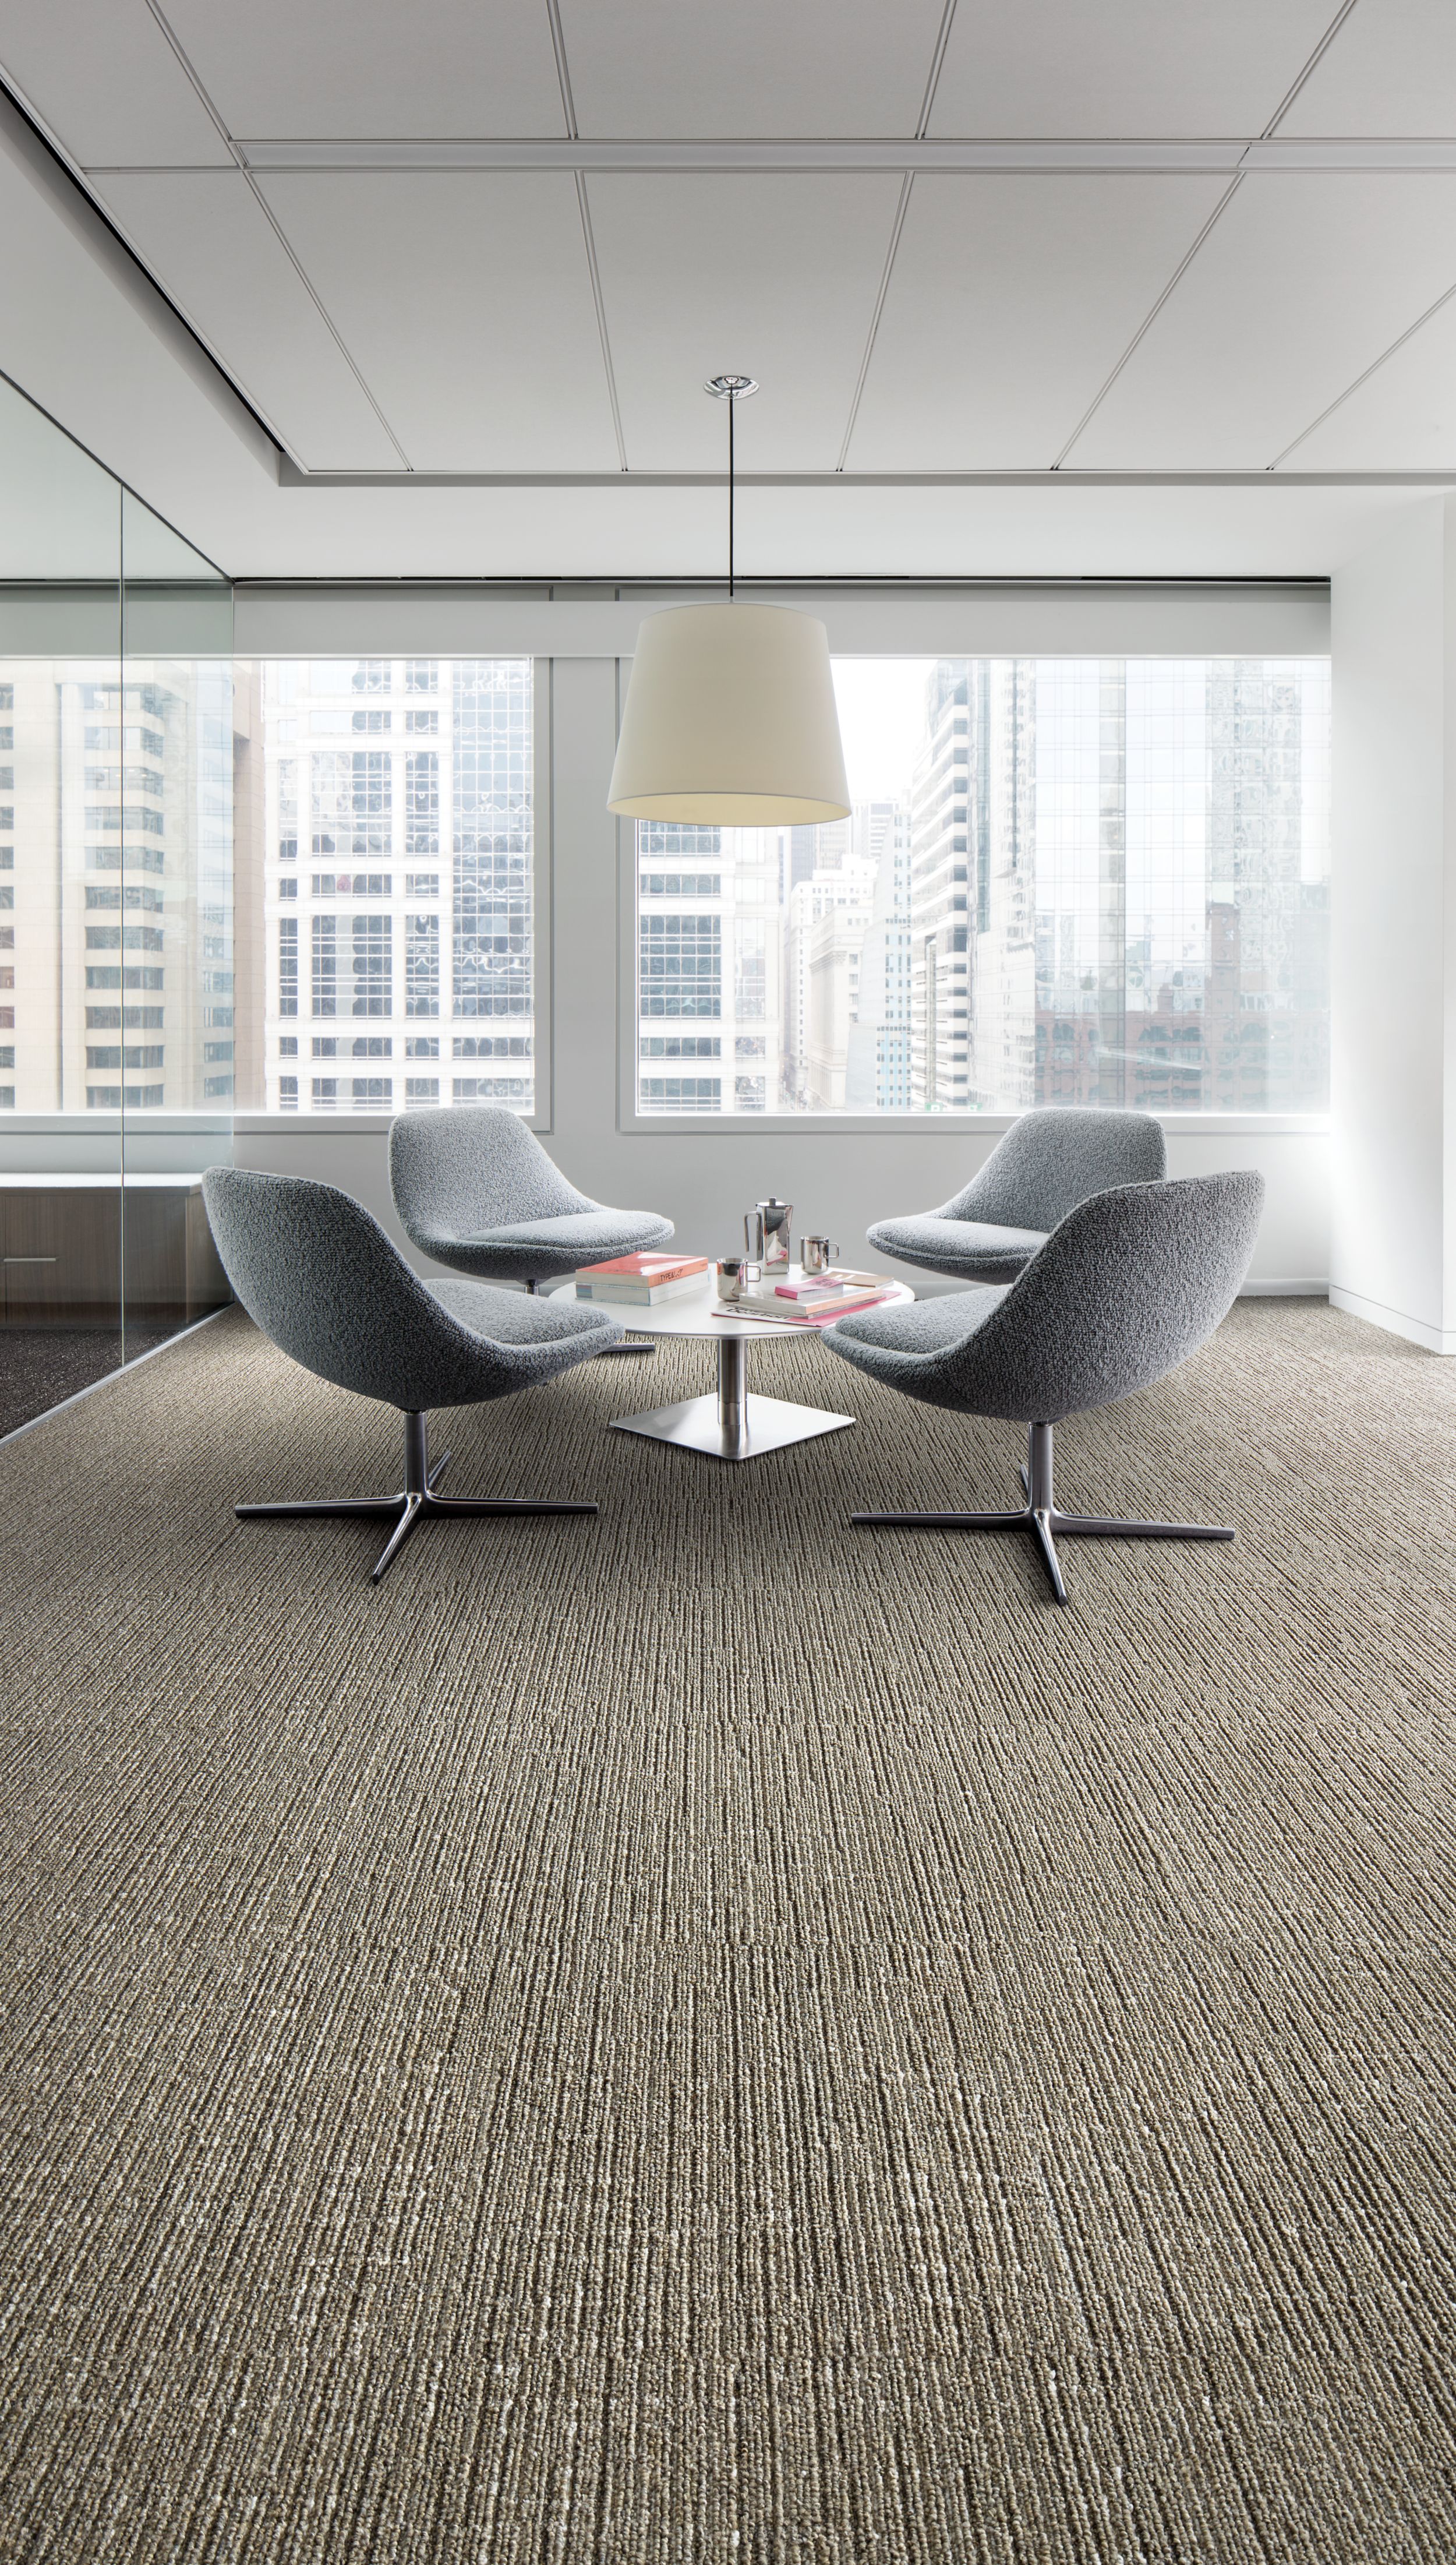 Interface Night Flight carpet tile in office sitting area with large windows and city view imagen número 5